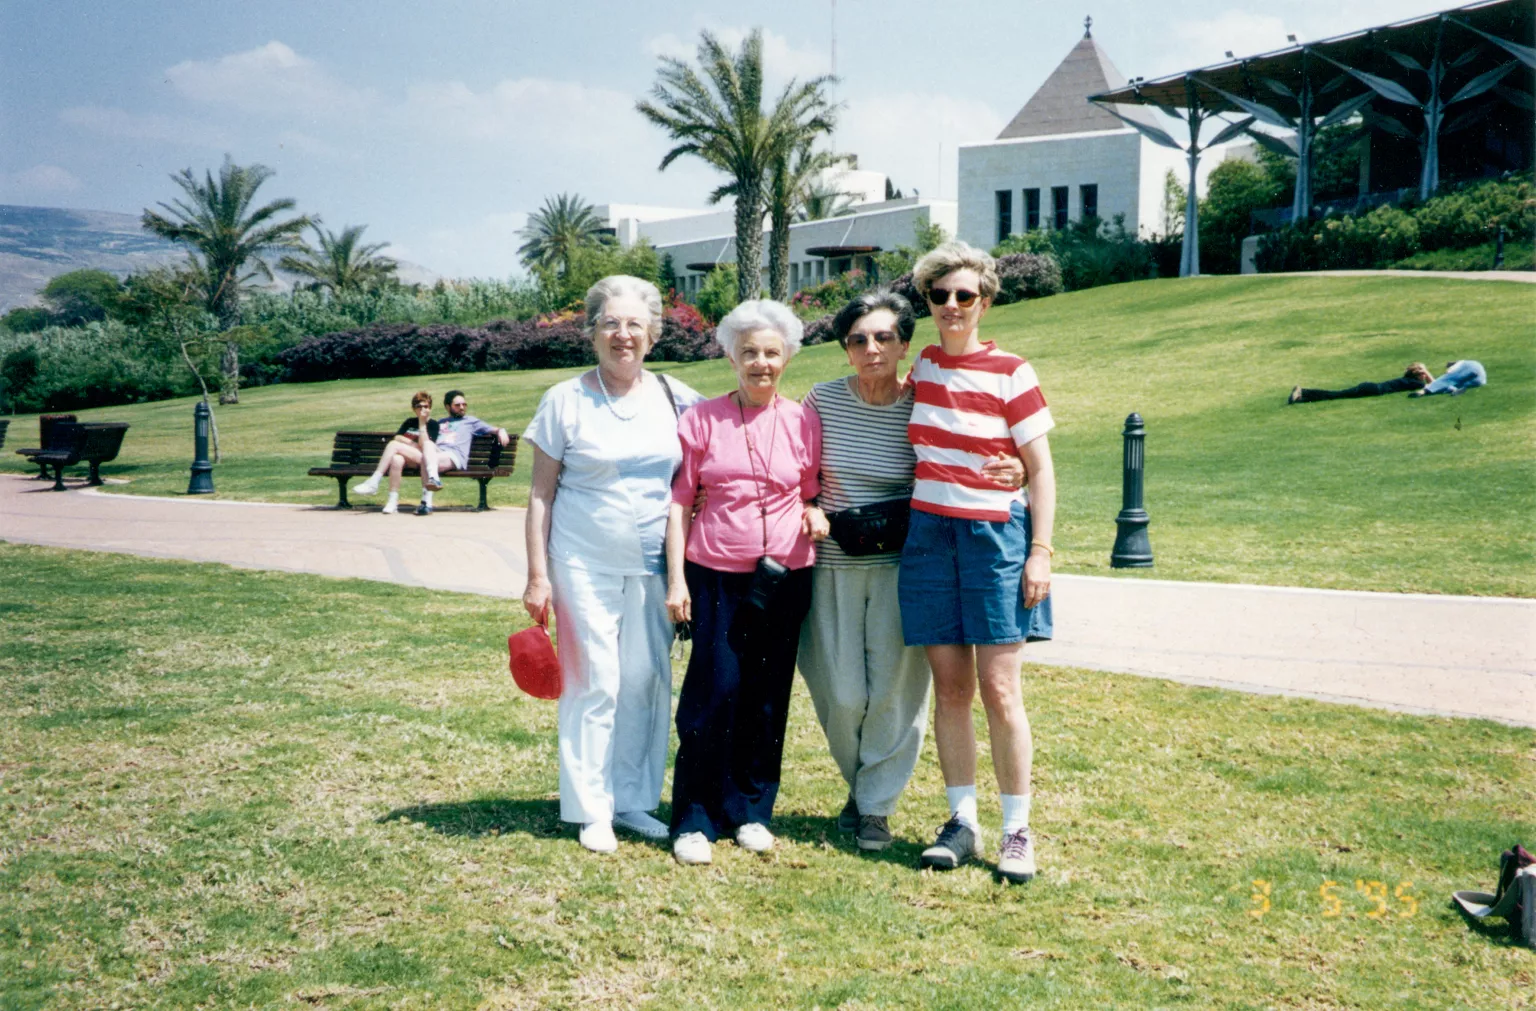 Viera Slesingerova with her daughter and friends in Israel